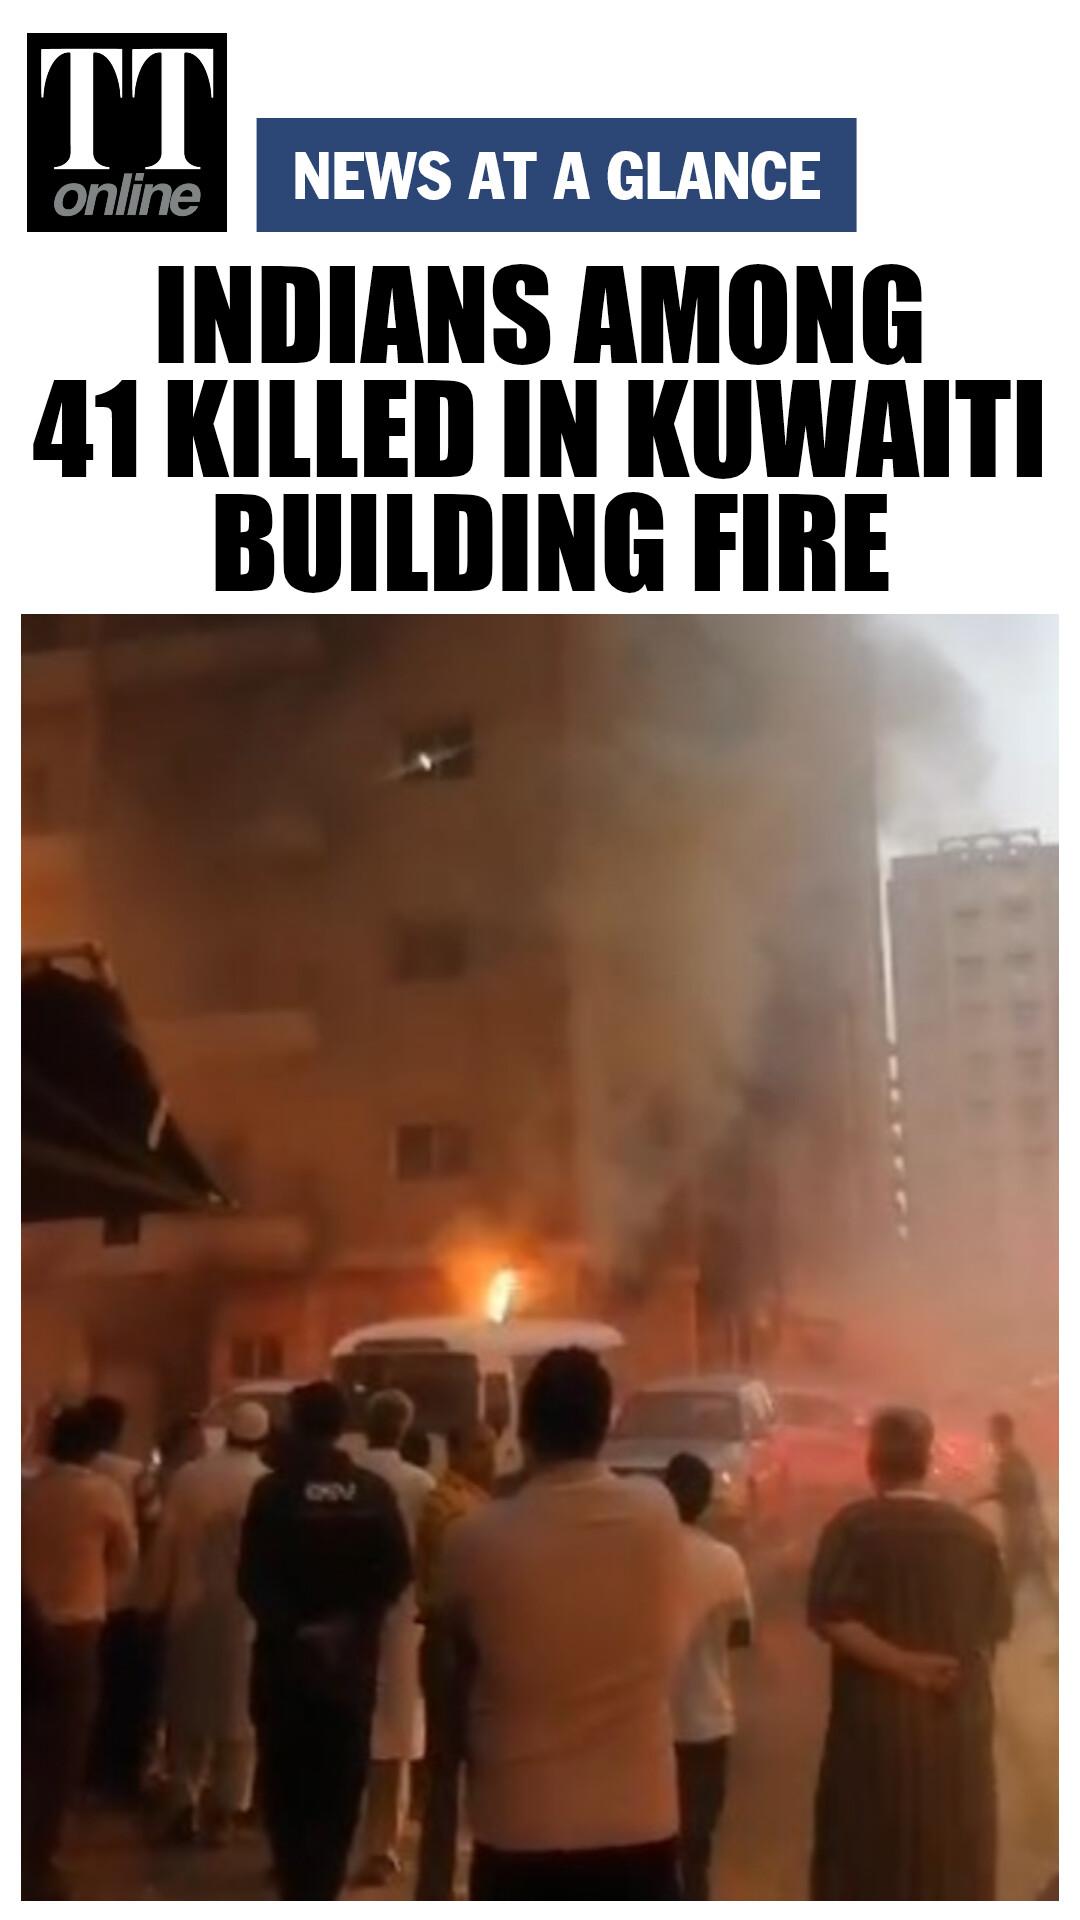 Several Indians Feared to be Among 41 Killed in Kuwait Building Fire